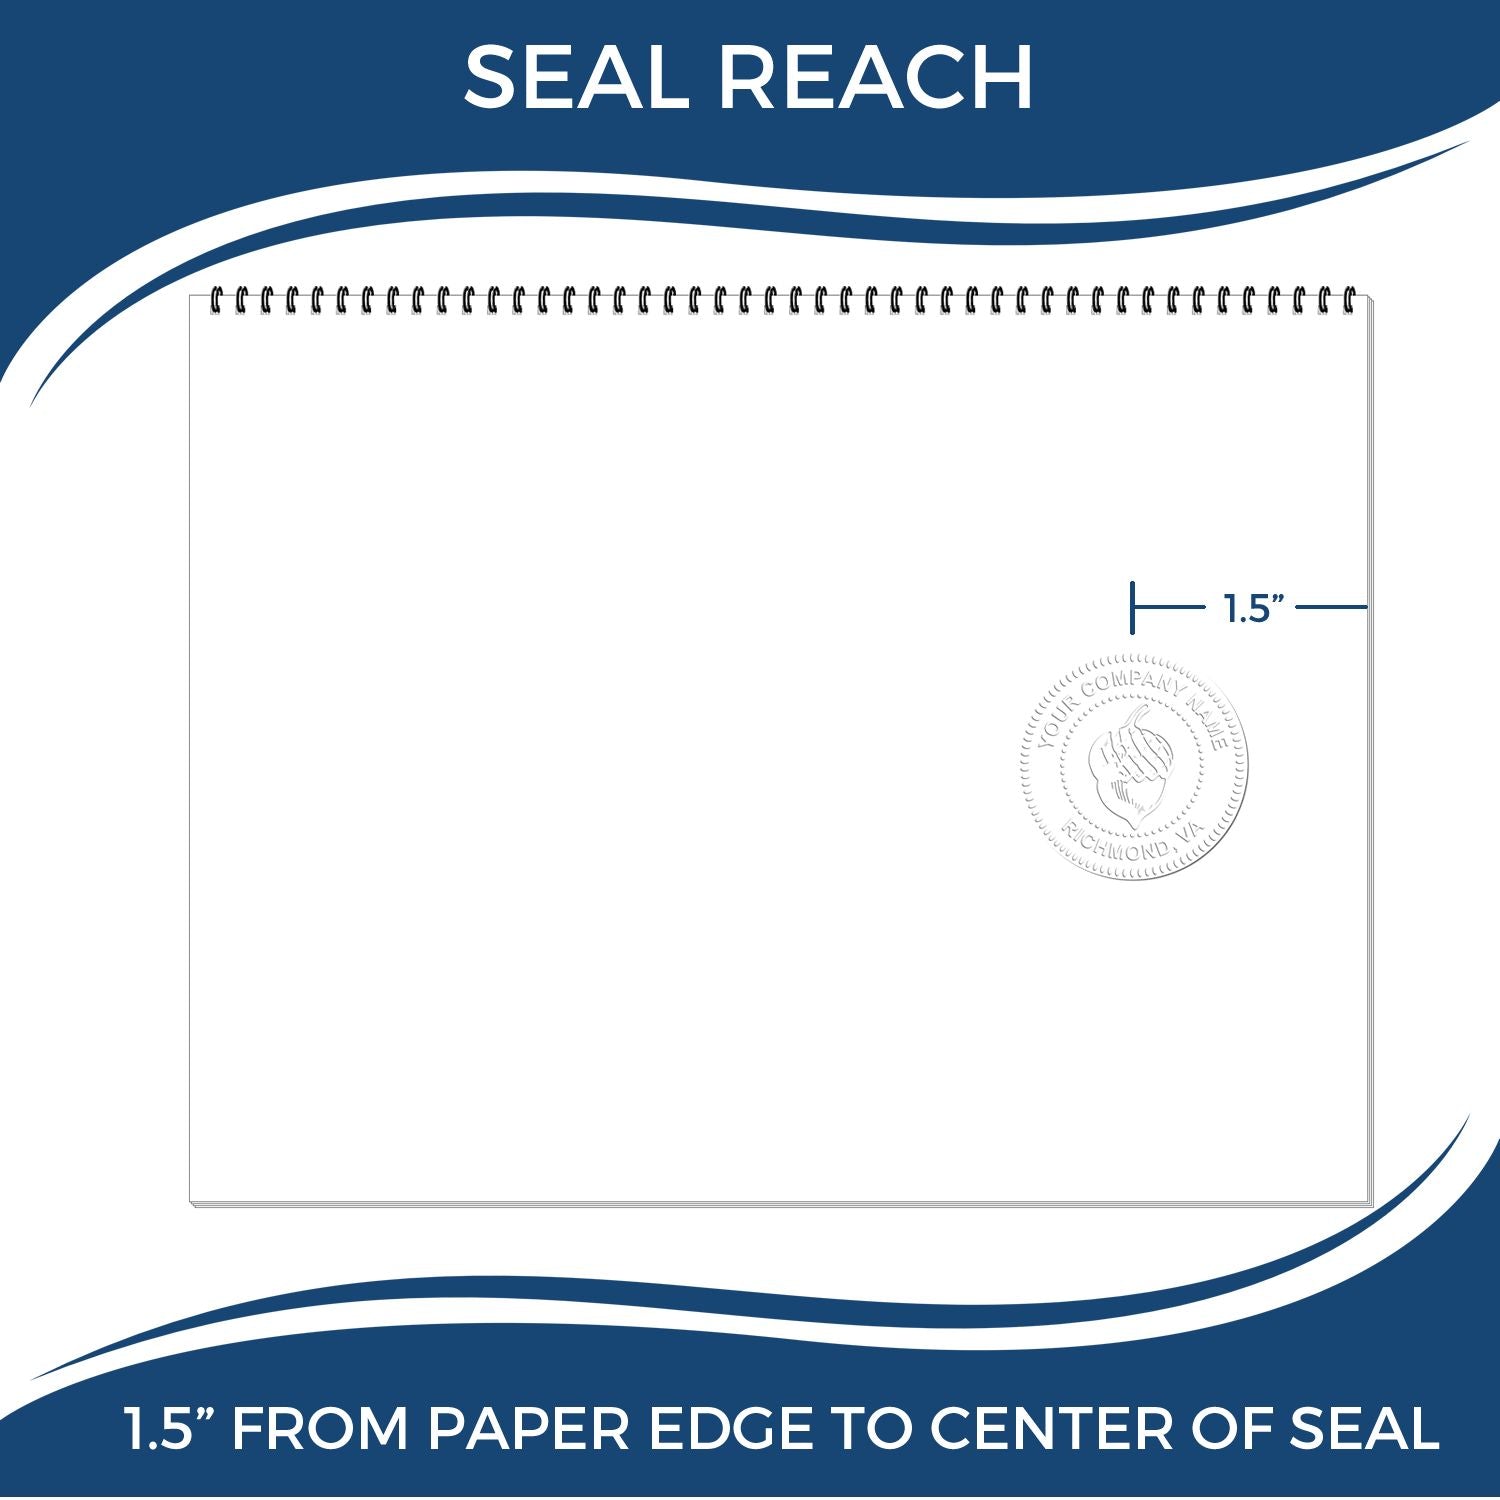 An infographic showing the seal reach which is represented by a ruler and a miniature seal image of the Gift Wisconsin Landscape Architect Seal